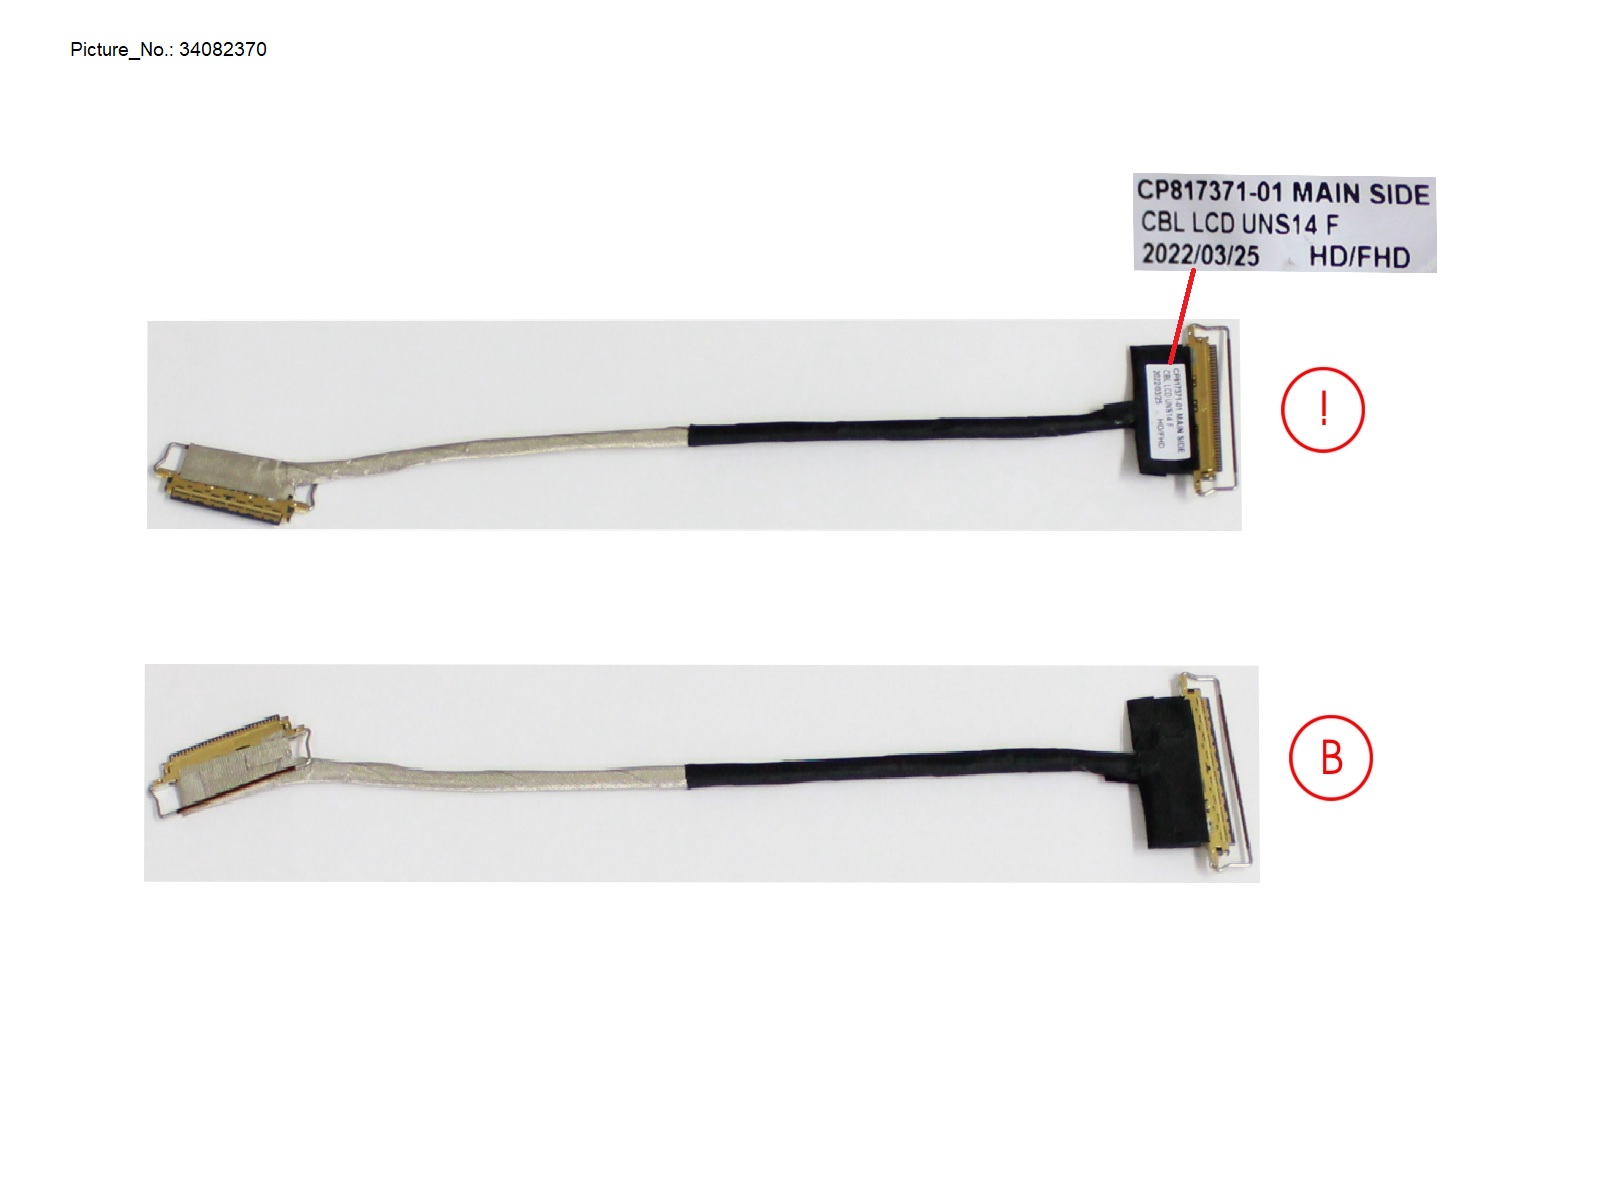 CABLE, LCD FOR HD/FHD